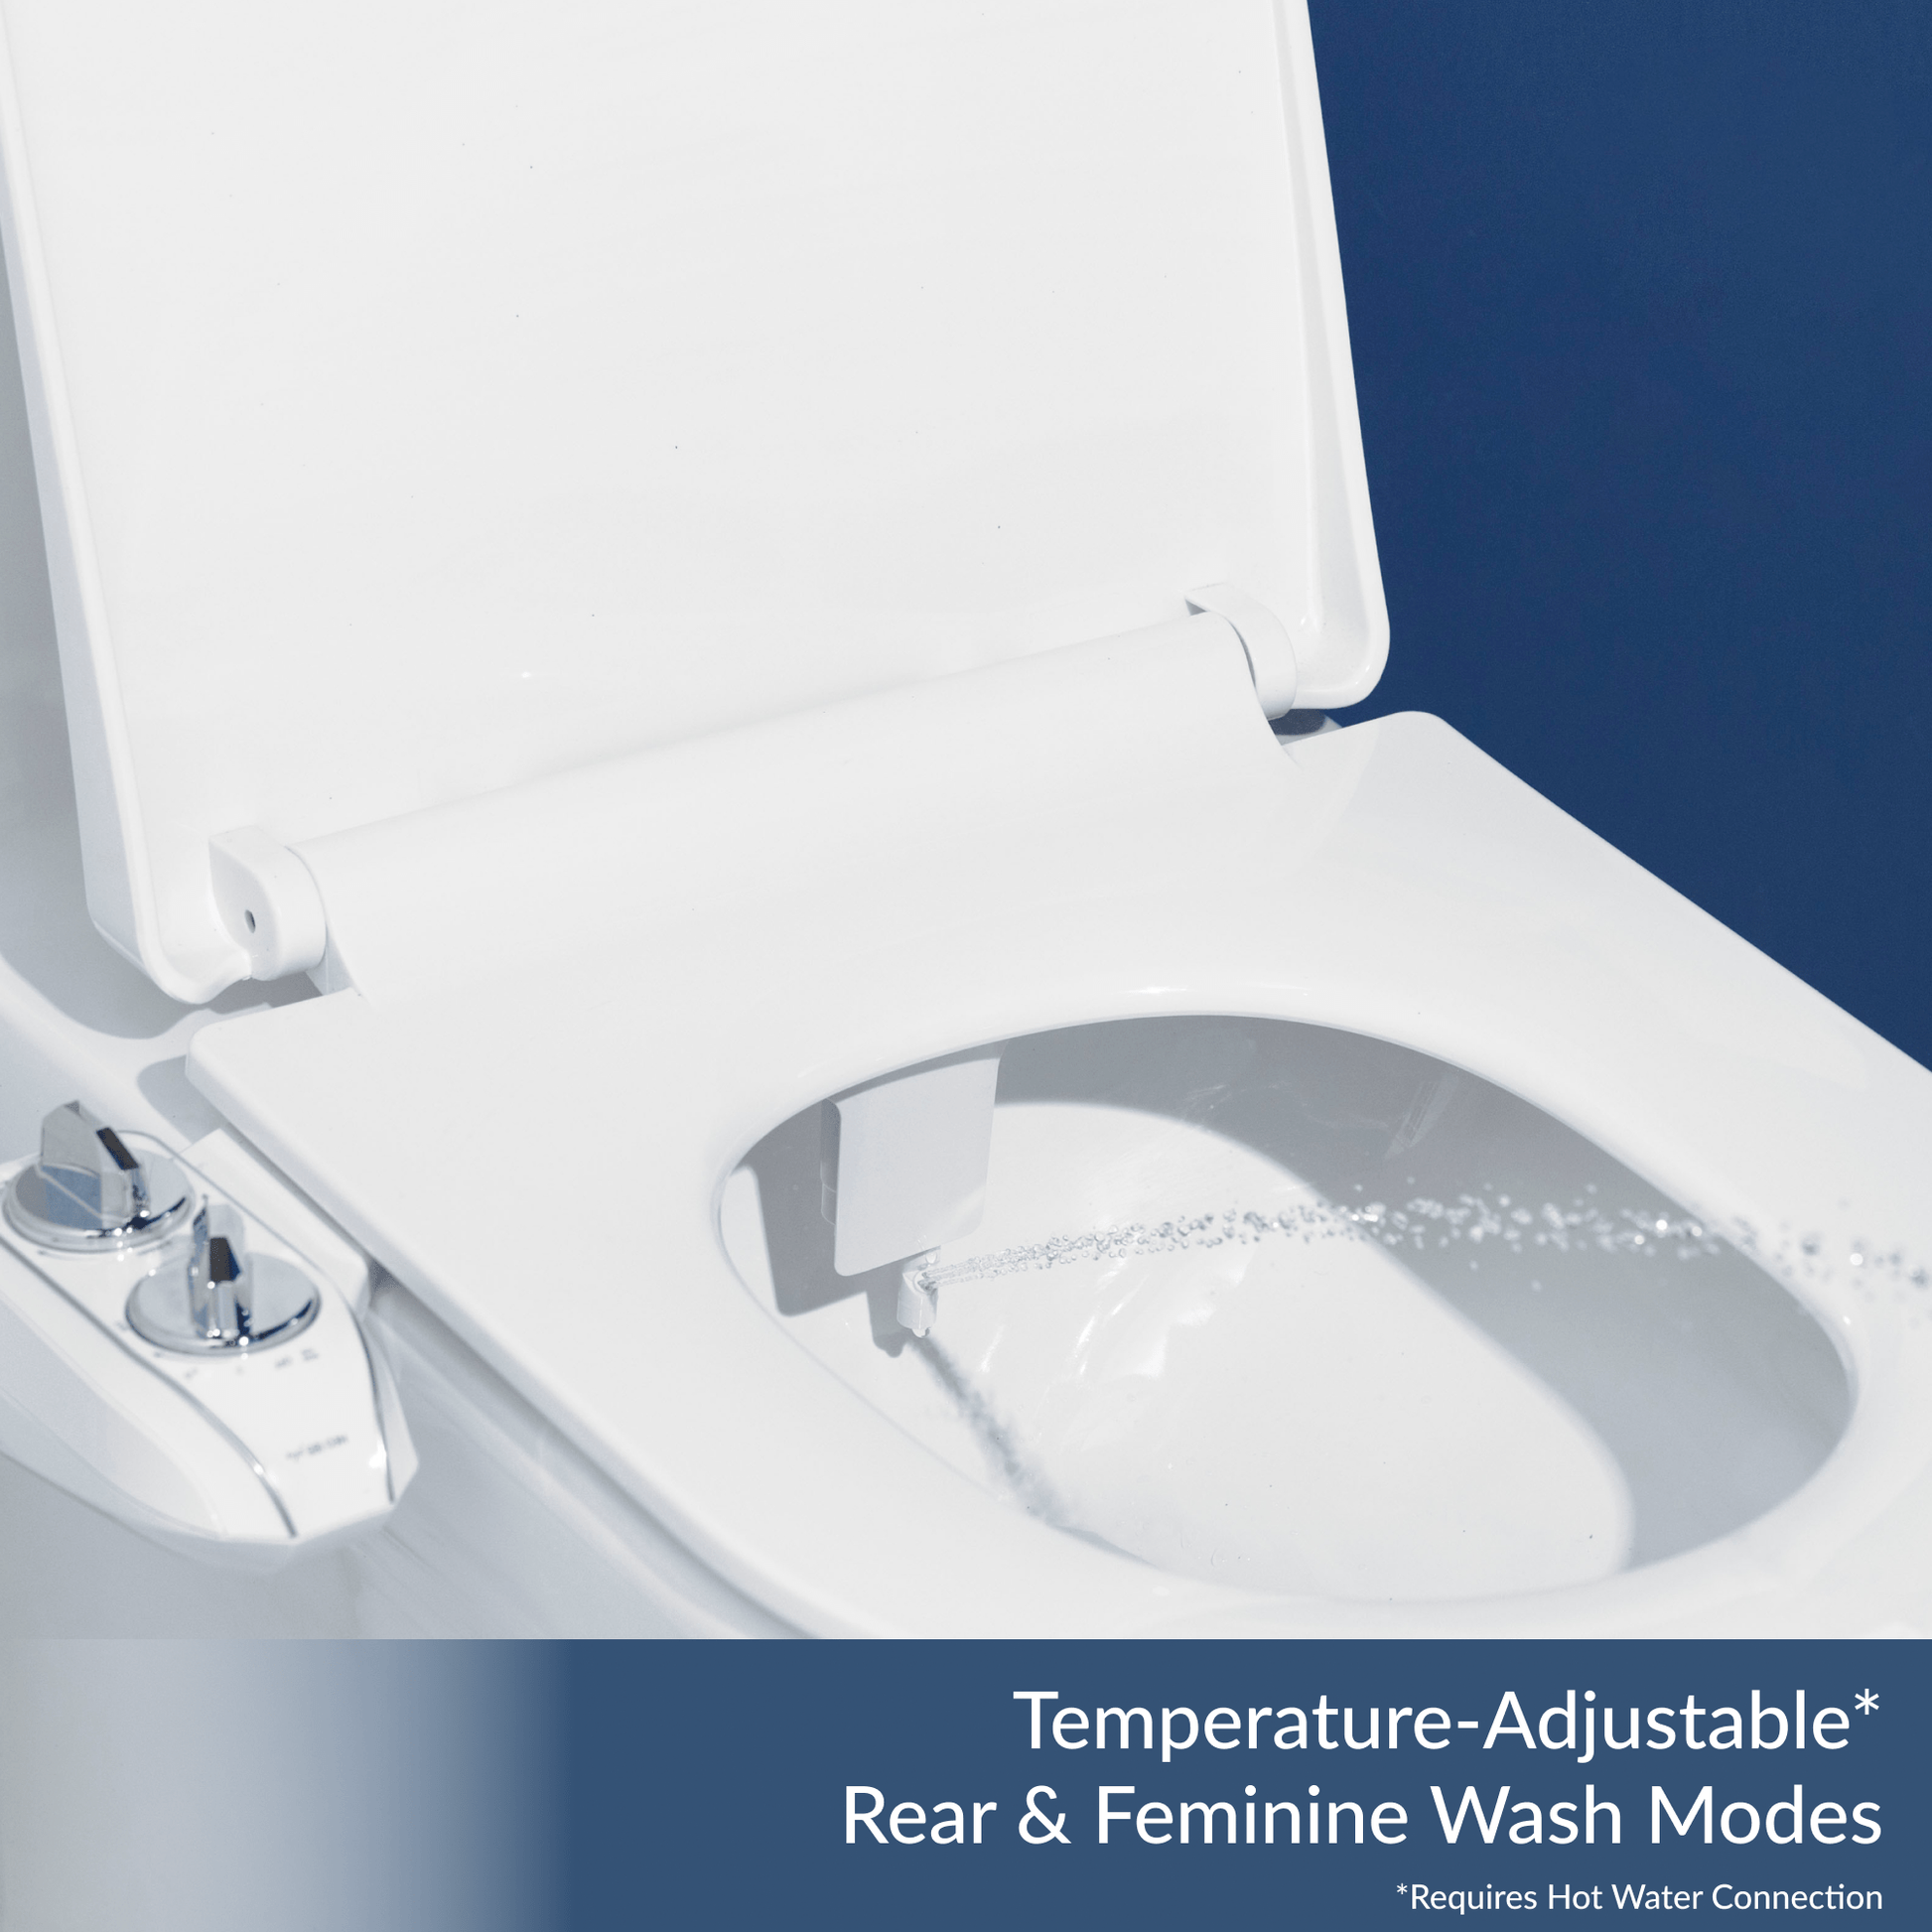 320 LUXE Bidet models include a Rear and Feminine Wash Mode with adjustable temperature